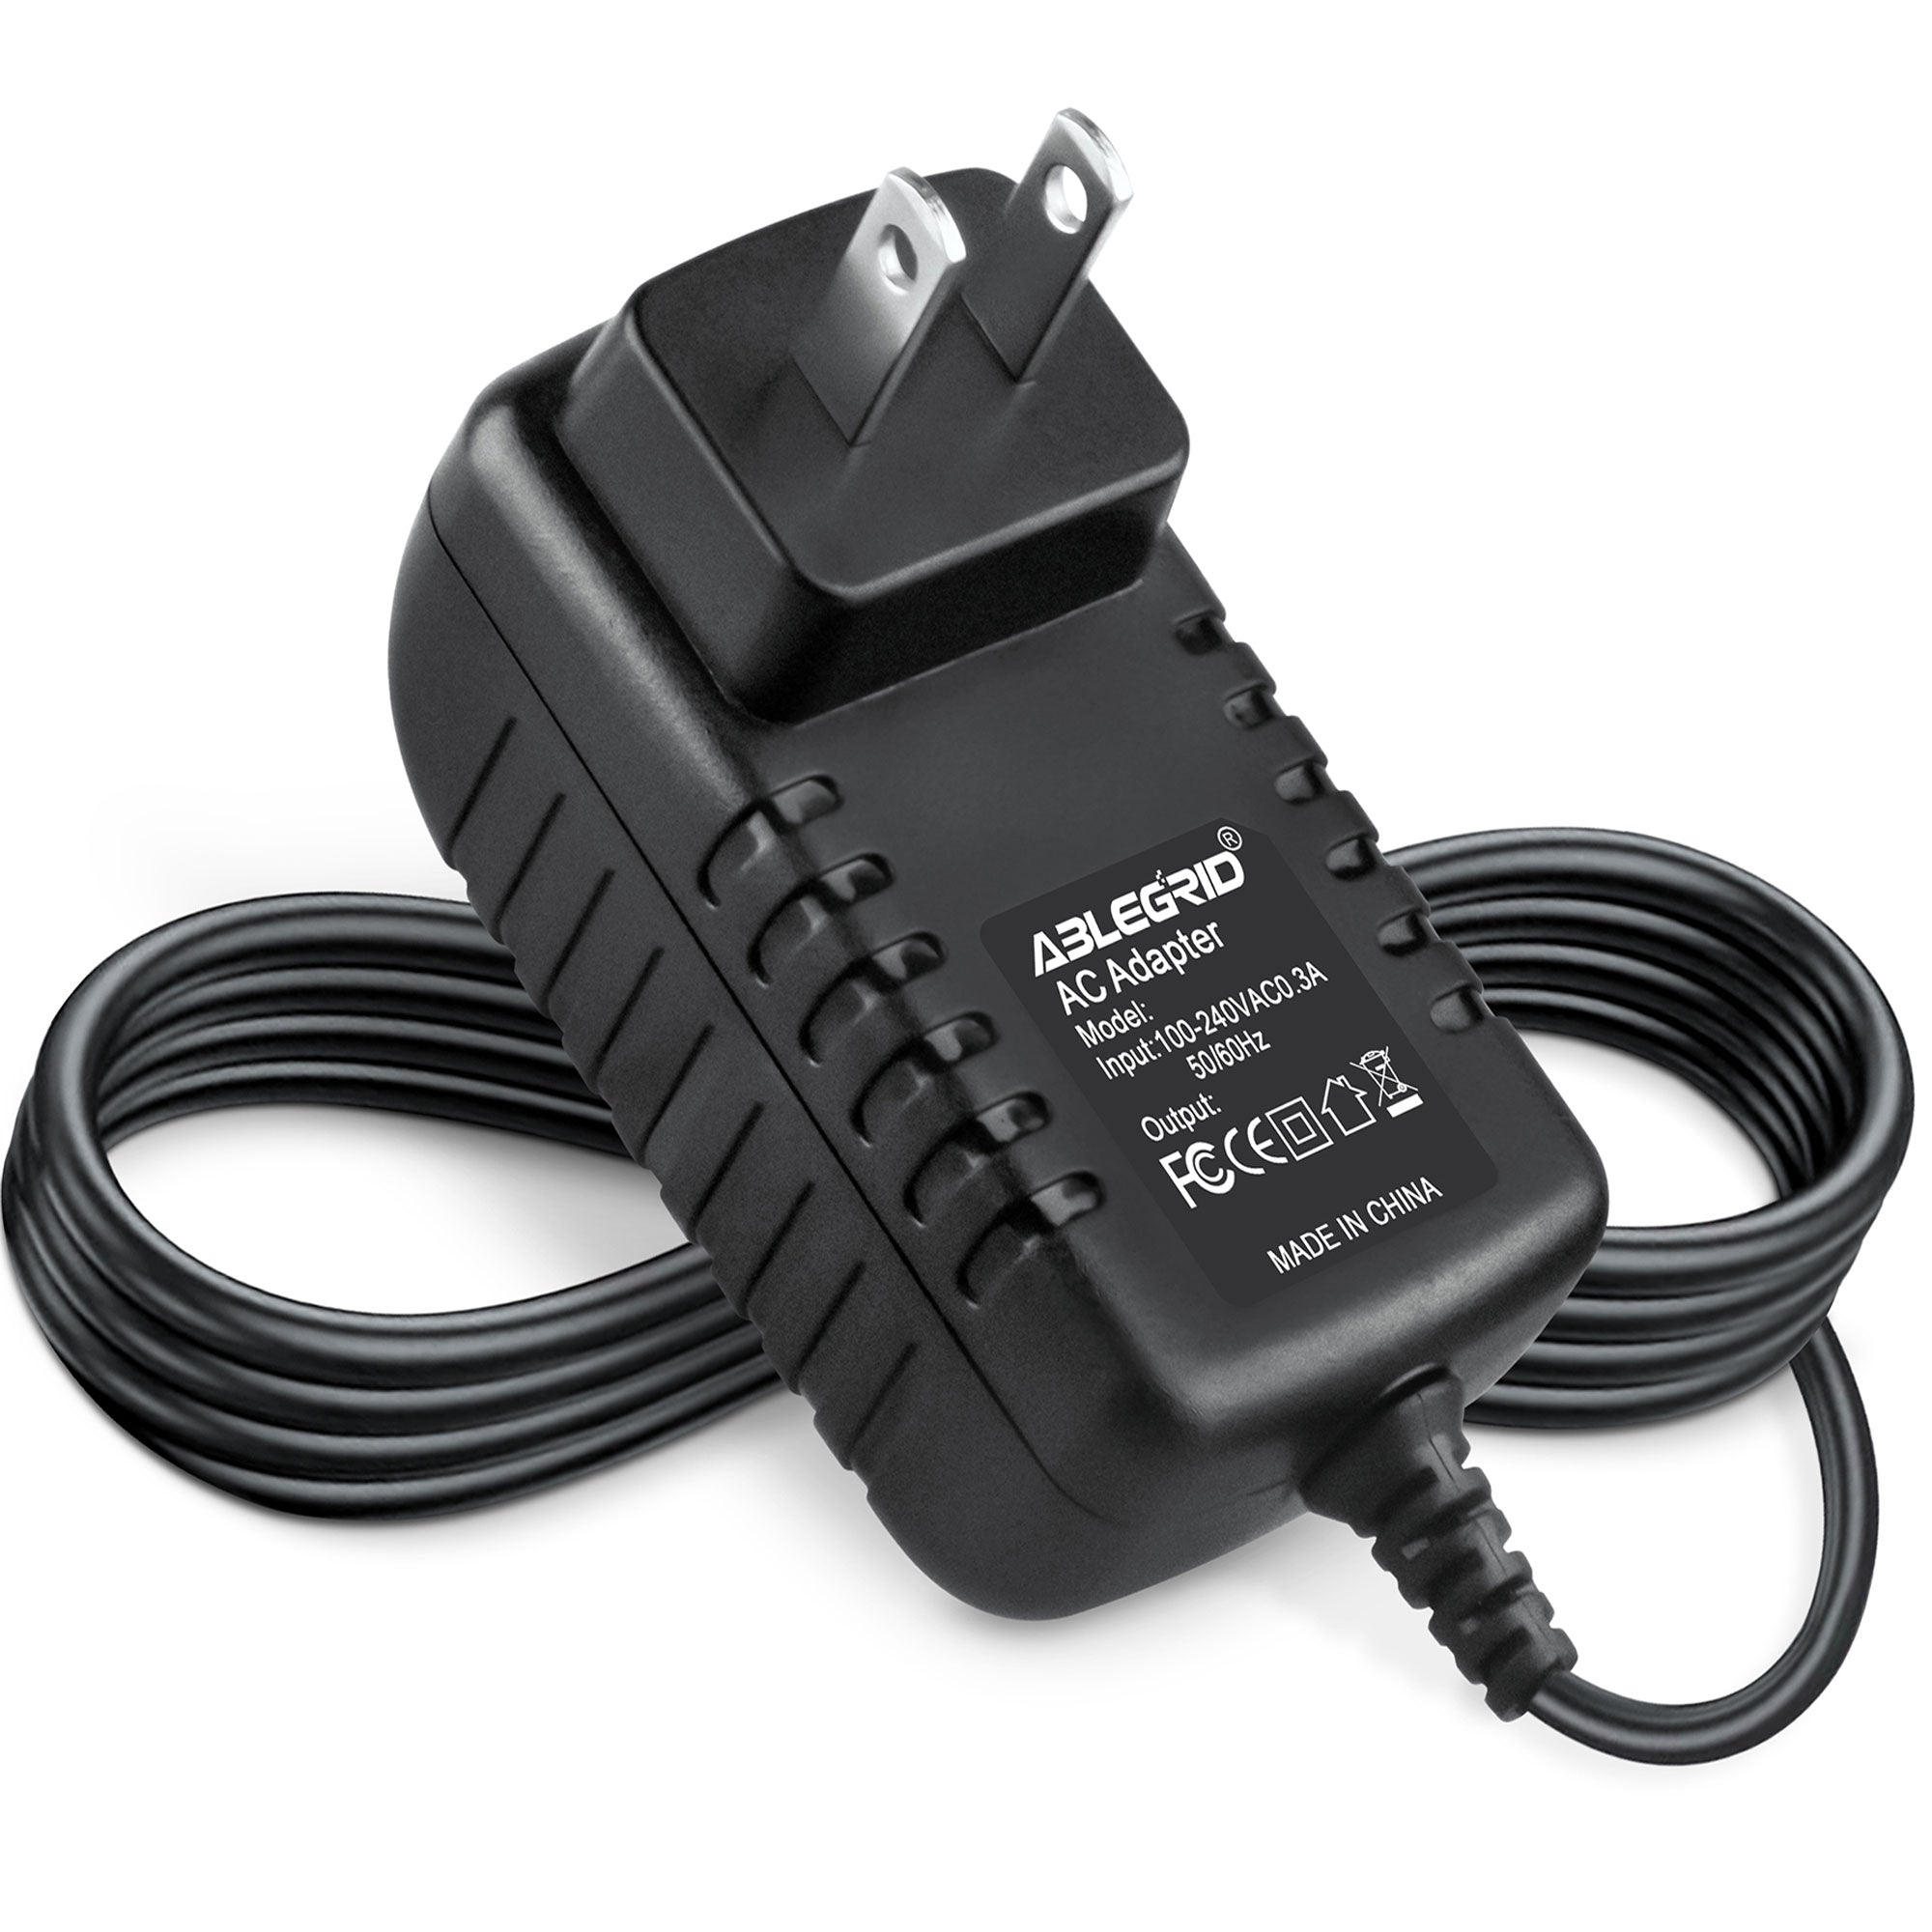 AbleGrid AC Adapter for #547 #607 Meade LX90 LX90 GPS LX10 LX50 All DS Power Supply Cord Cable PS Wall Home Charger Input: 100 - 240 VAC 50/60Hz Worldwide Voltage Use Mains PSU